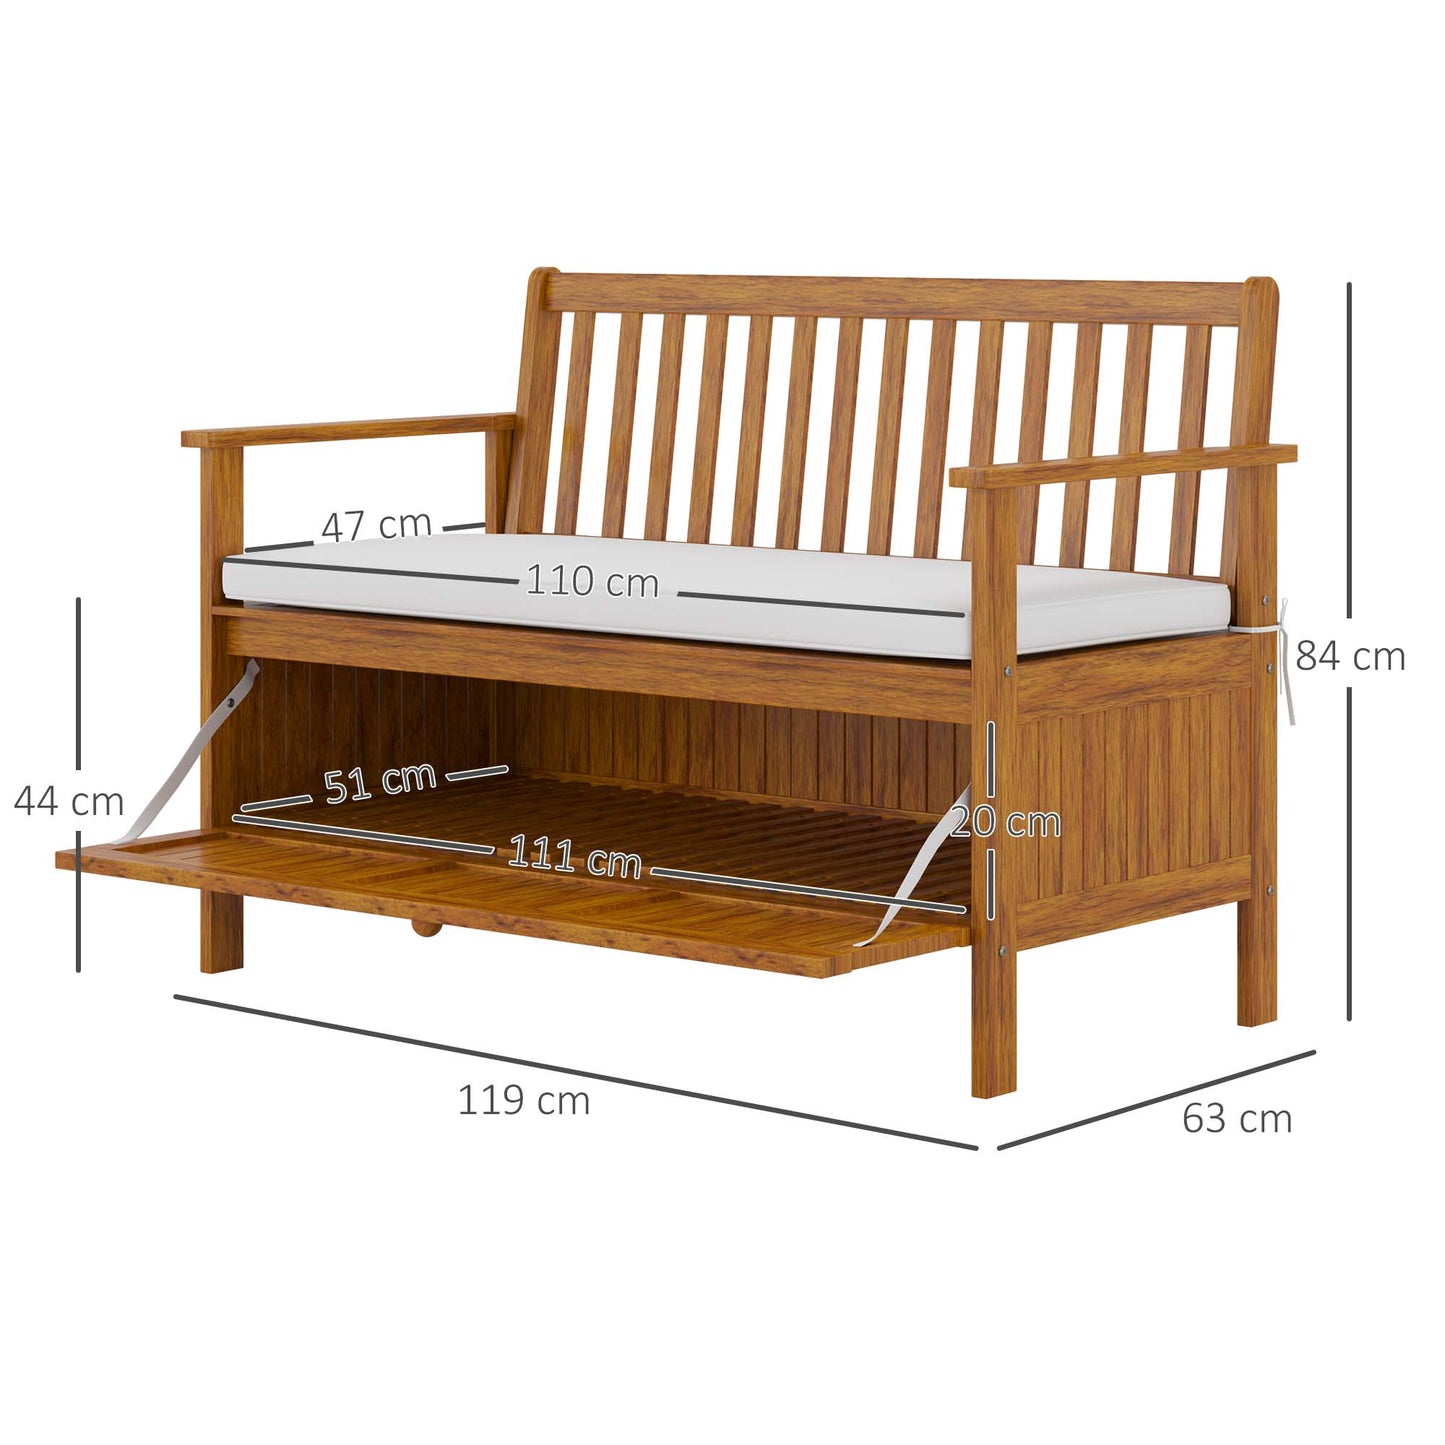 Outsunny Wood 2-Seater Garden Storage Bench for Patio Porch Decor Outdoor Seating